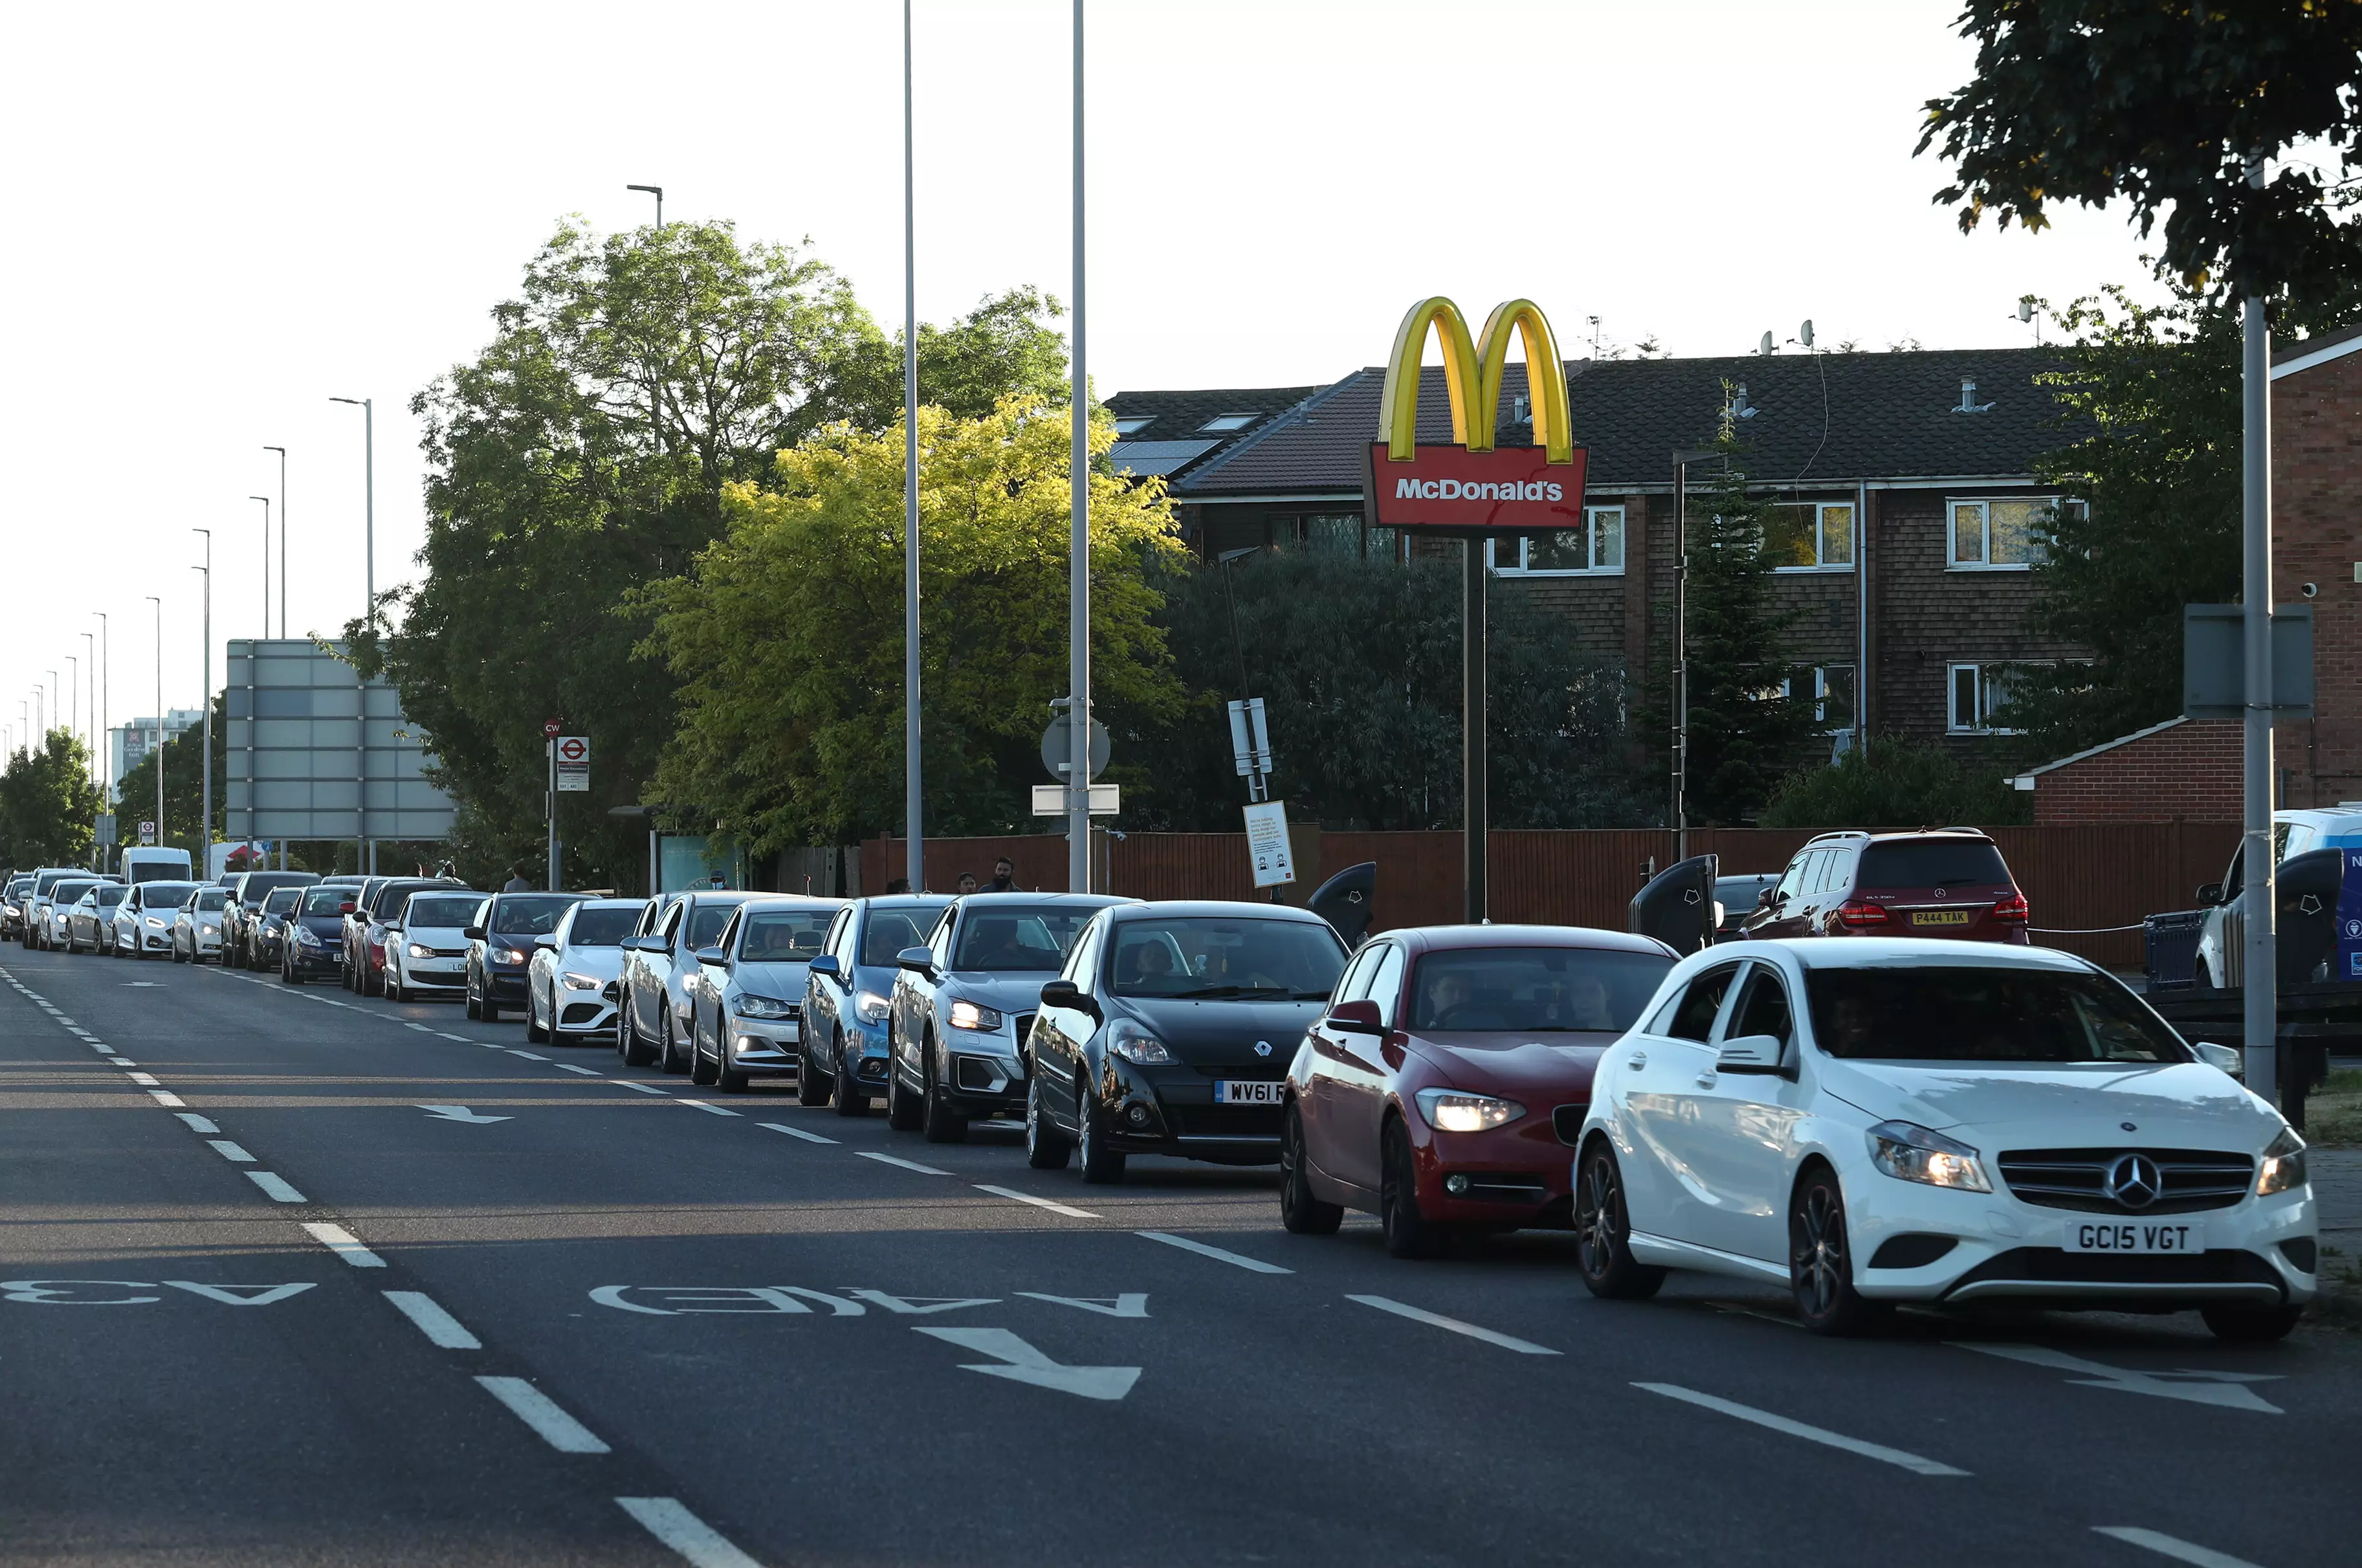 People in Hounslow were more than ready for their Maccies fix when it re-opened this week.